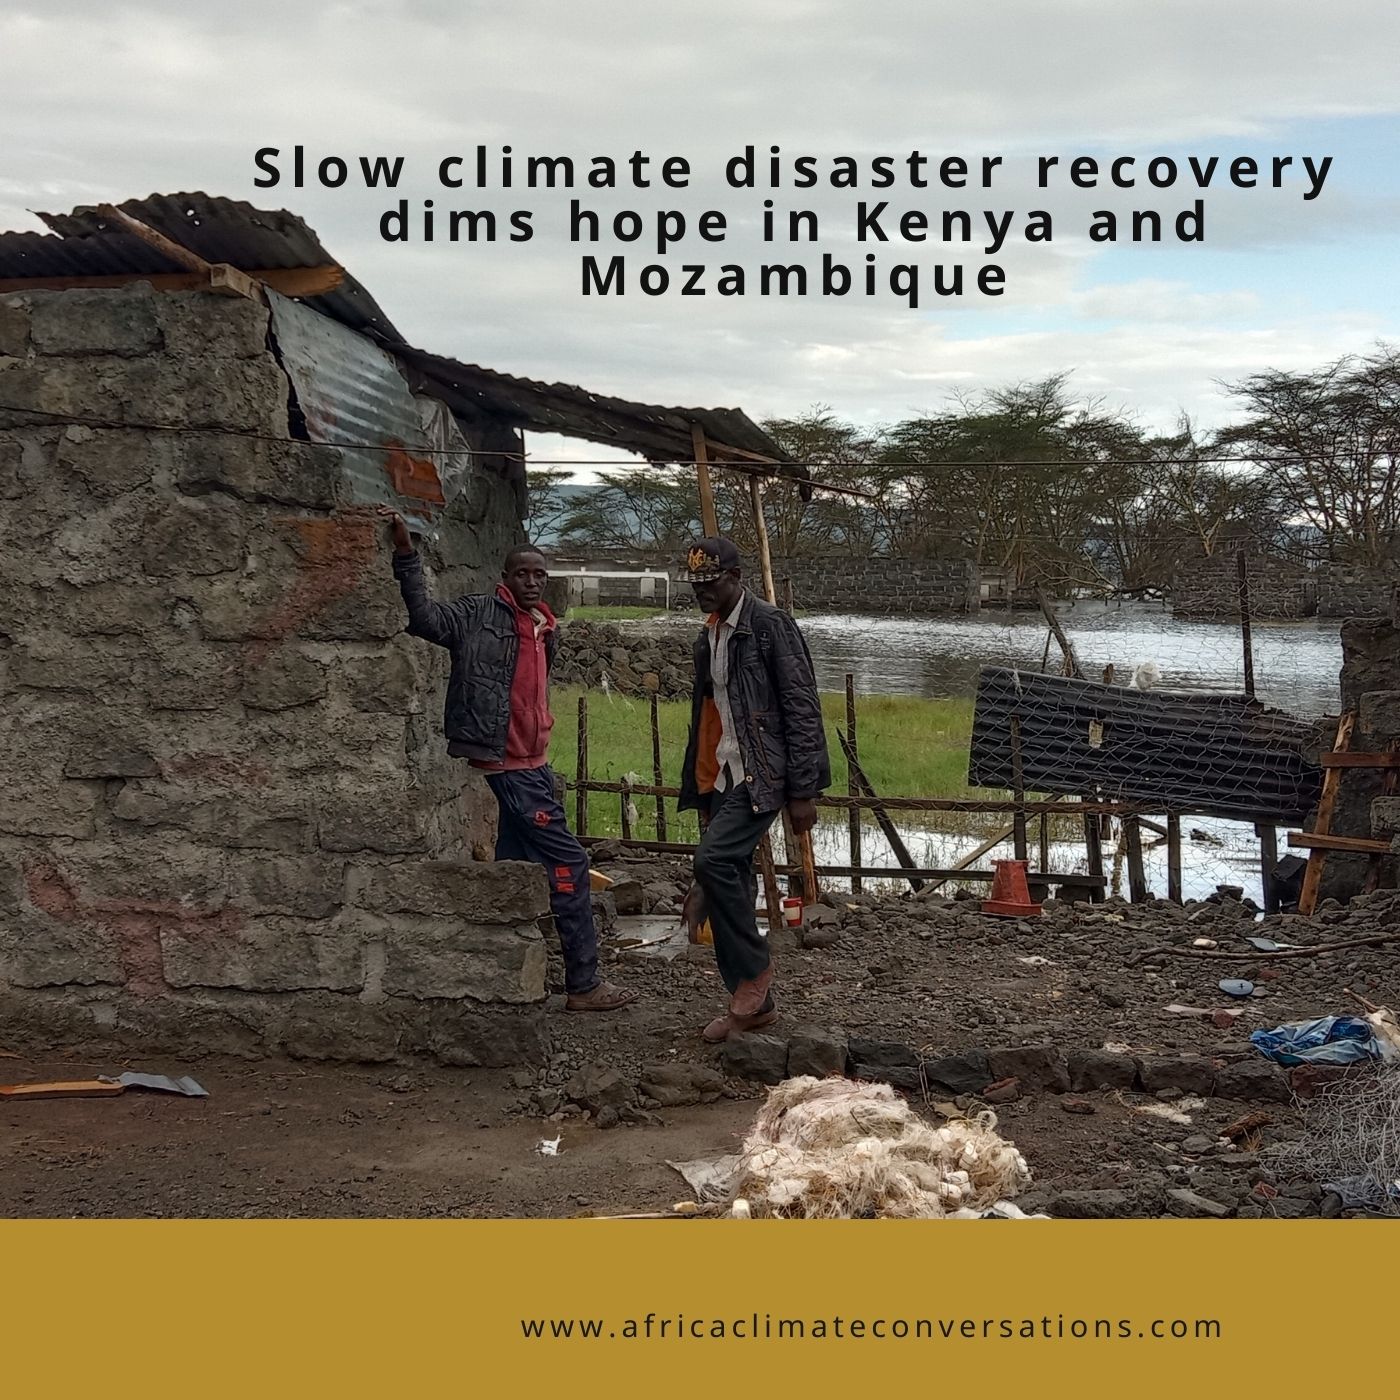 Slow climate disaster recovery dims hope in Kenya and Mozambique